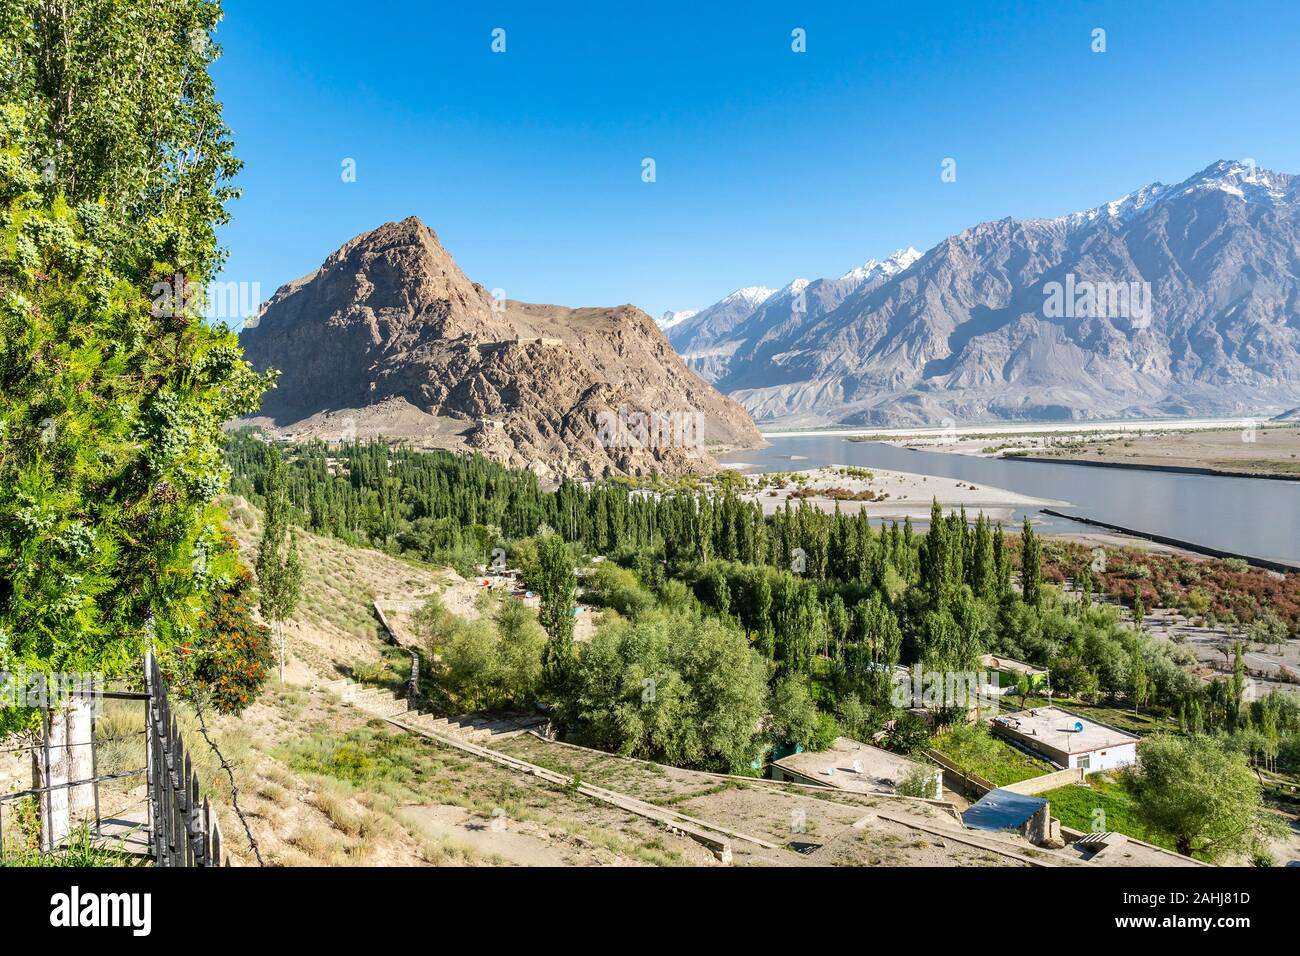 Skardu City Landscape Picturesque Panoramic View of Indus River and Snow Capped Mountains on a Sunny Blue Sky Day Stock Photo